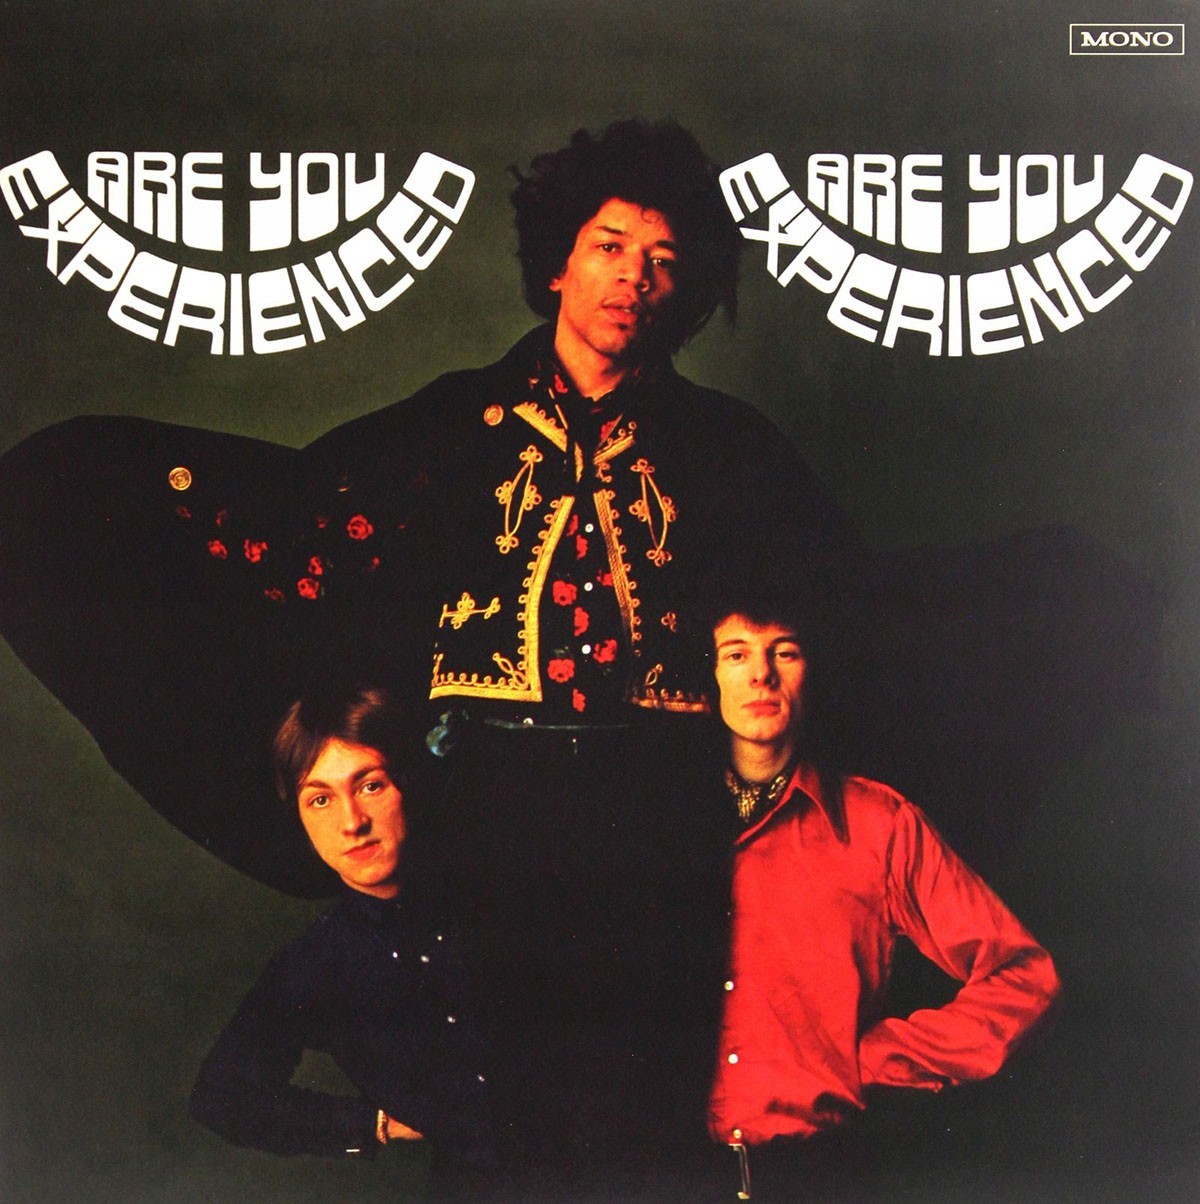 Are You Experienced - The Jimi Hendrix Experience (Track Records/Polydor Records/Reprise Records, 1967)